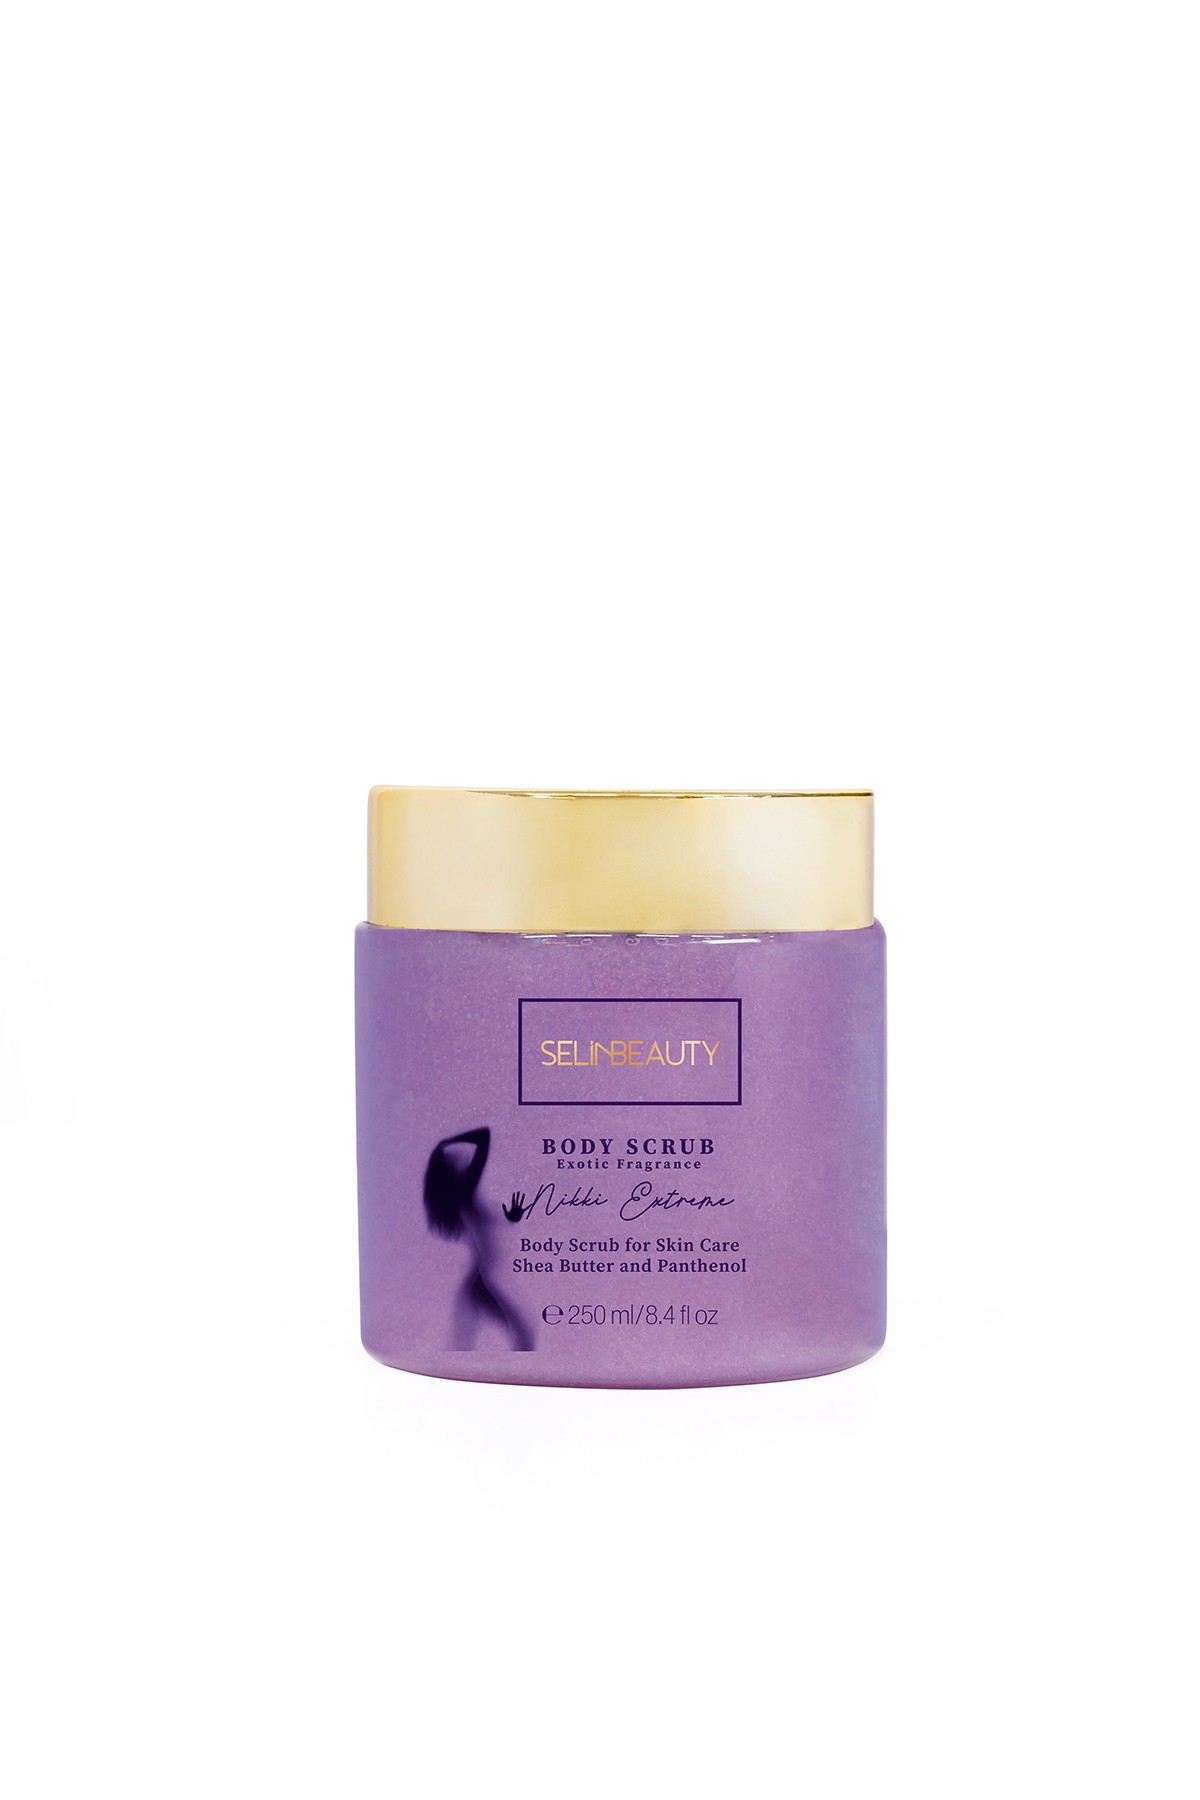 EXOTIC NIKKI EXTREME BODY BUTTER